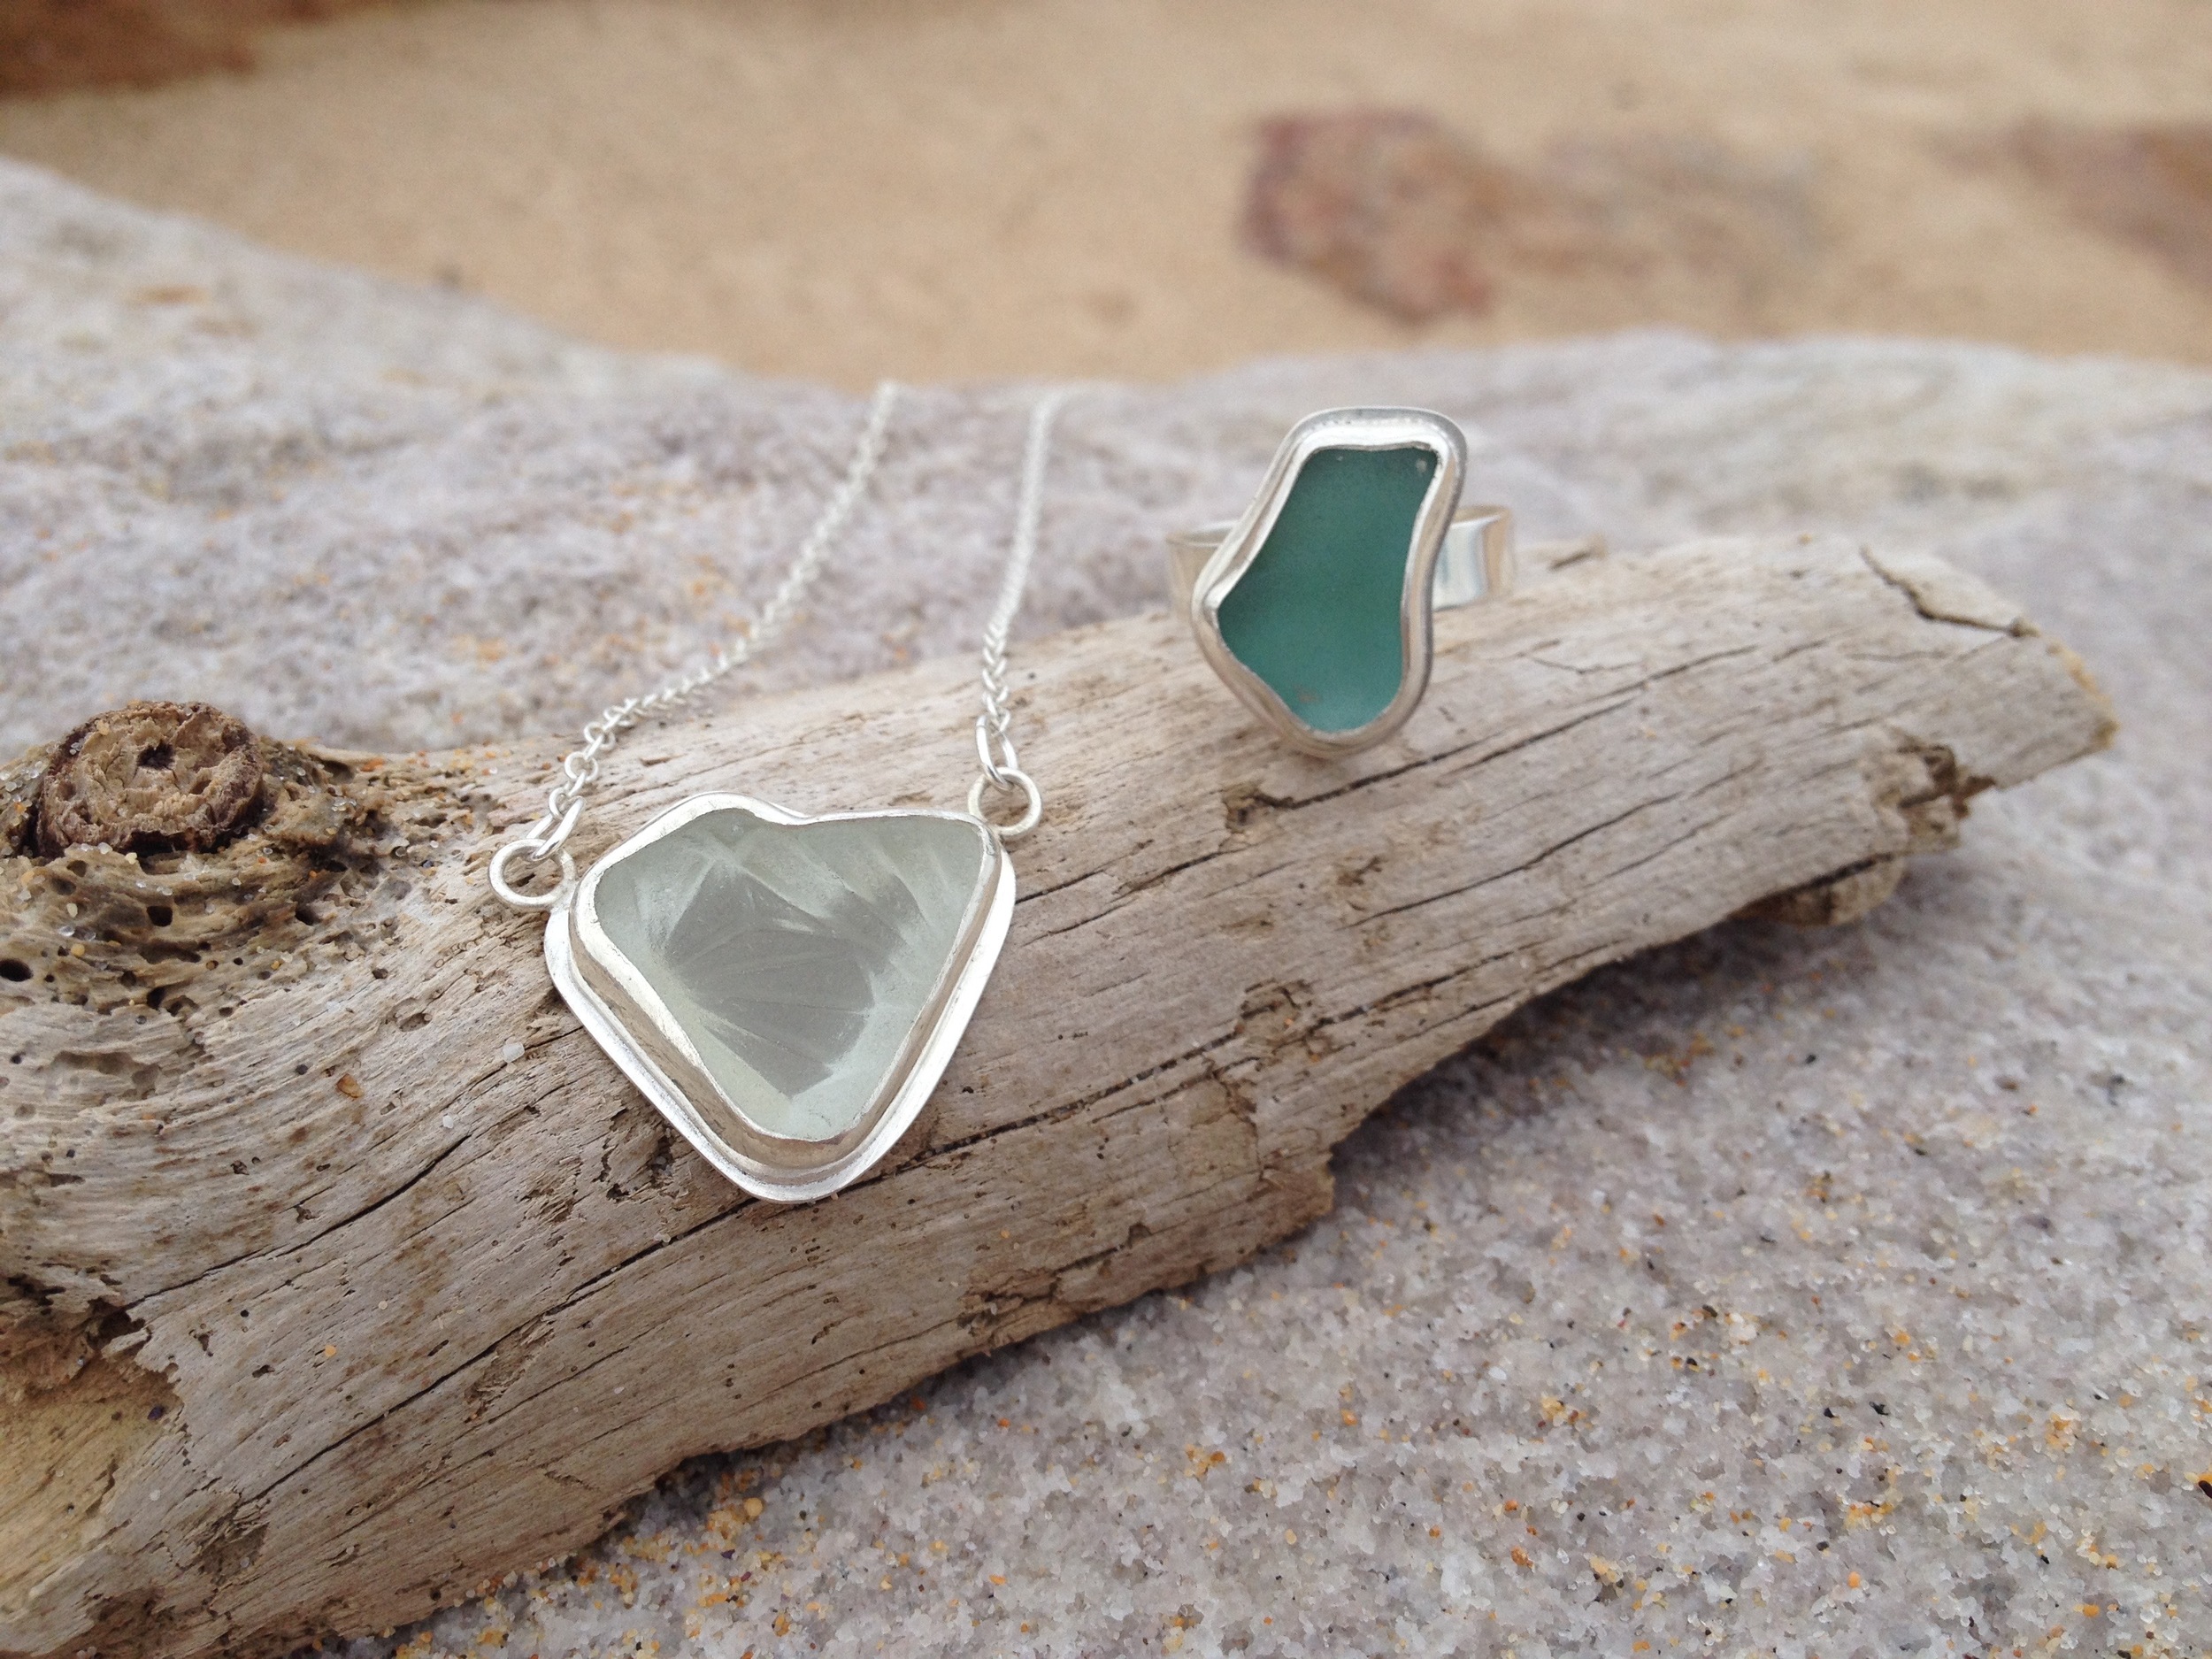 Crystal Heart White Sea Glass Necklace and Turquoise Sea Glass Ring Set